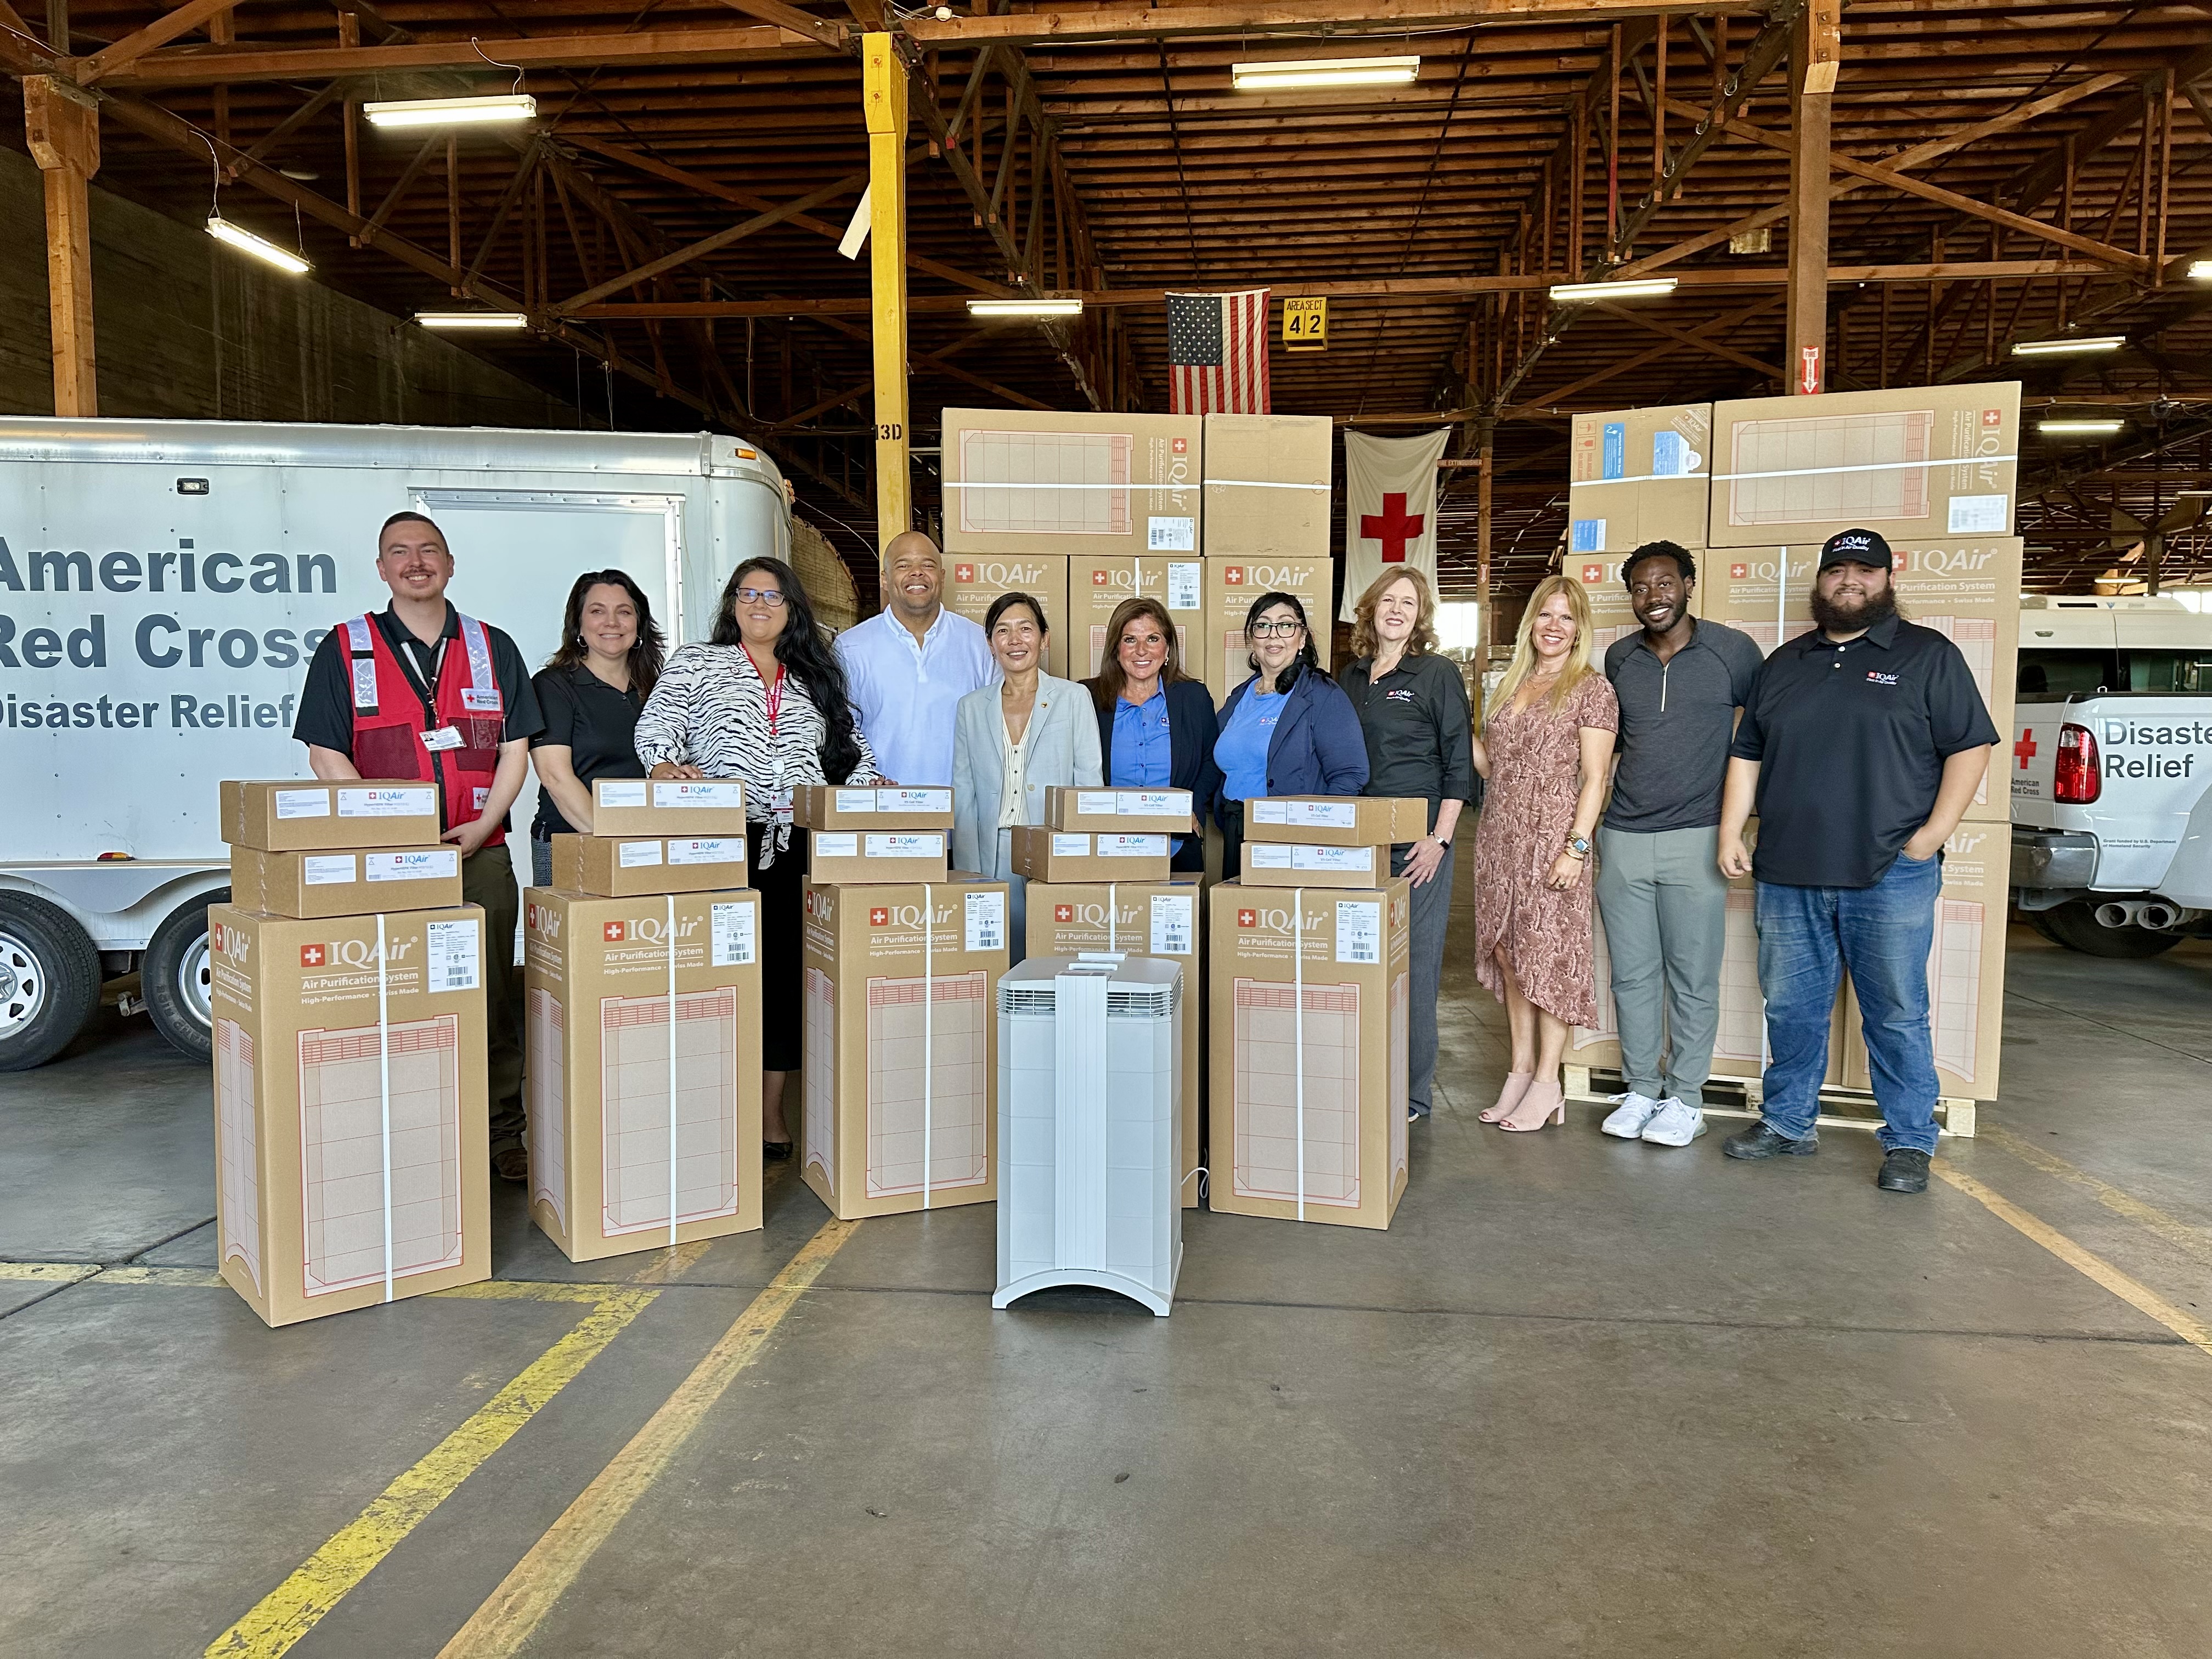 South Coast AQMD, IQAir Foundation, and American Red Cross staff deploy 183 portable air cleaners to the American Red Cross warehouse in Bell, California